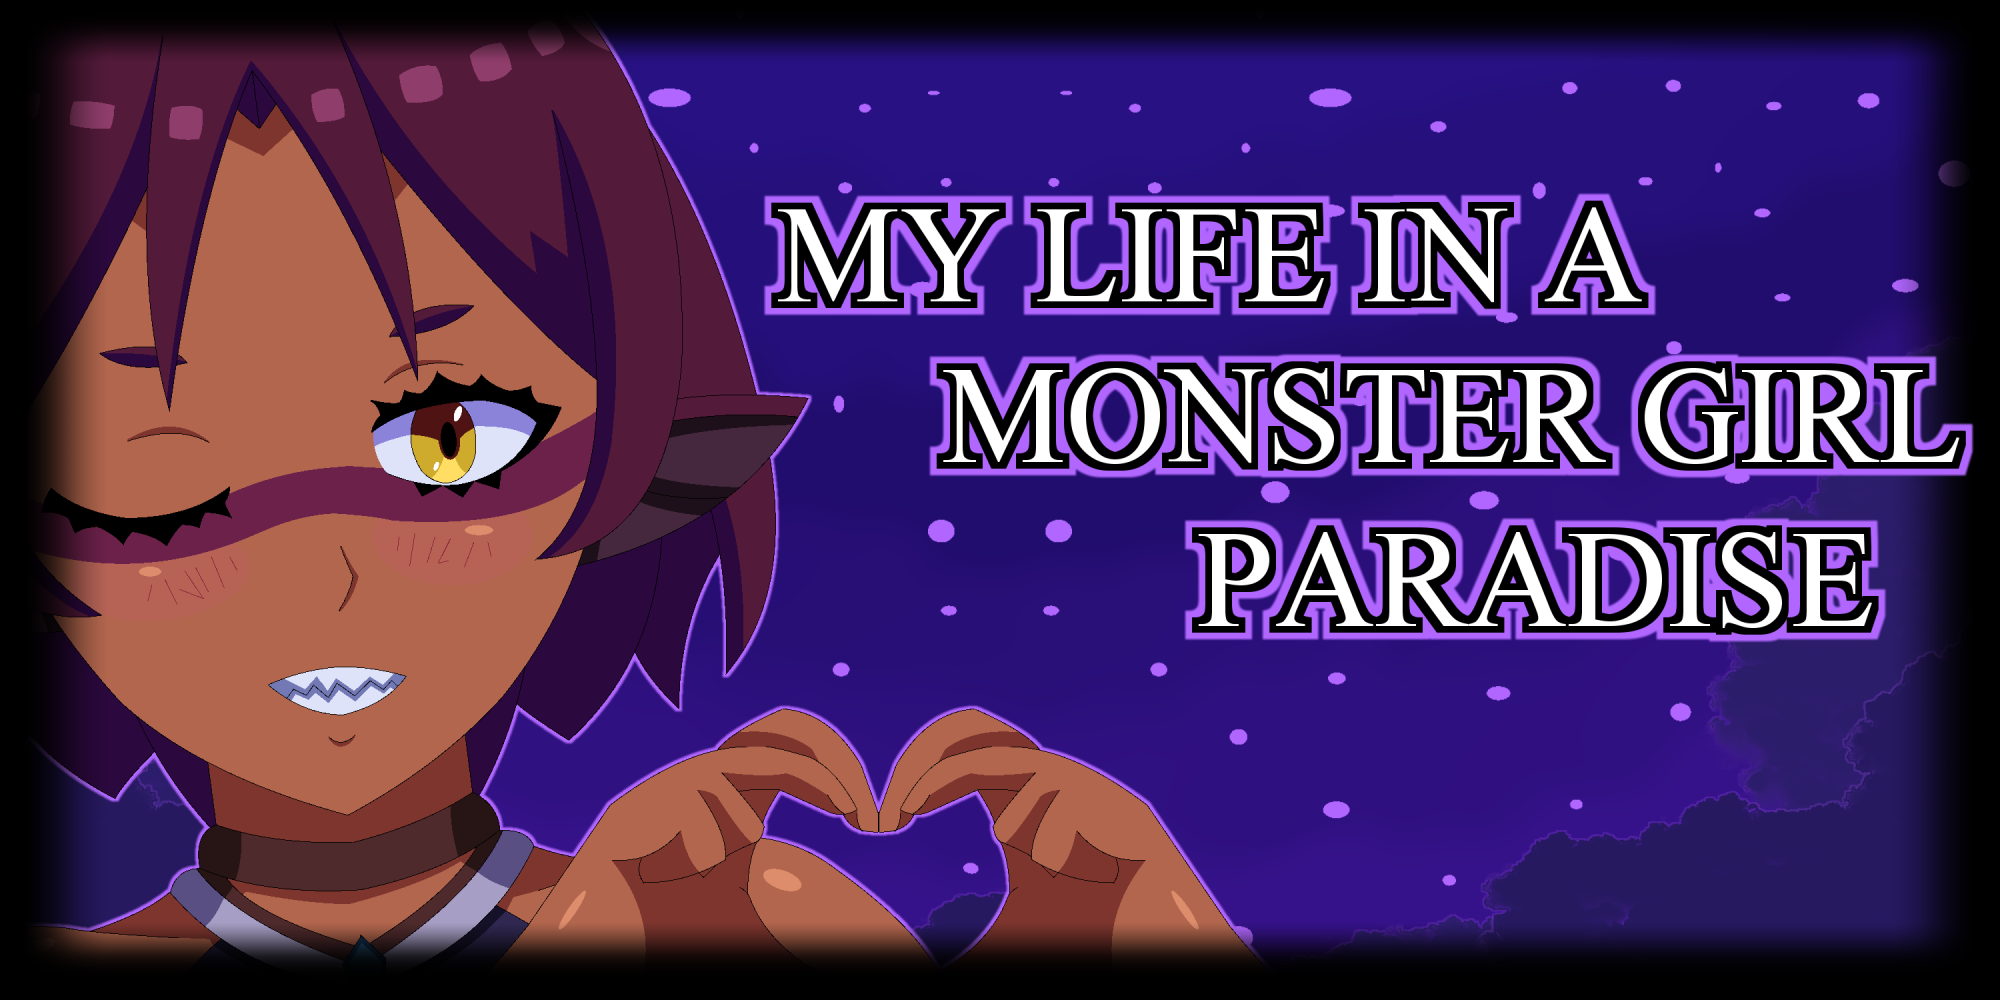 My Life In A Monster Girl Paradise Demo